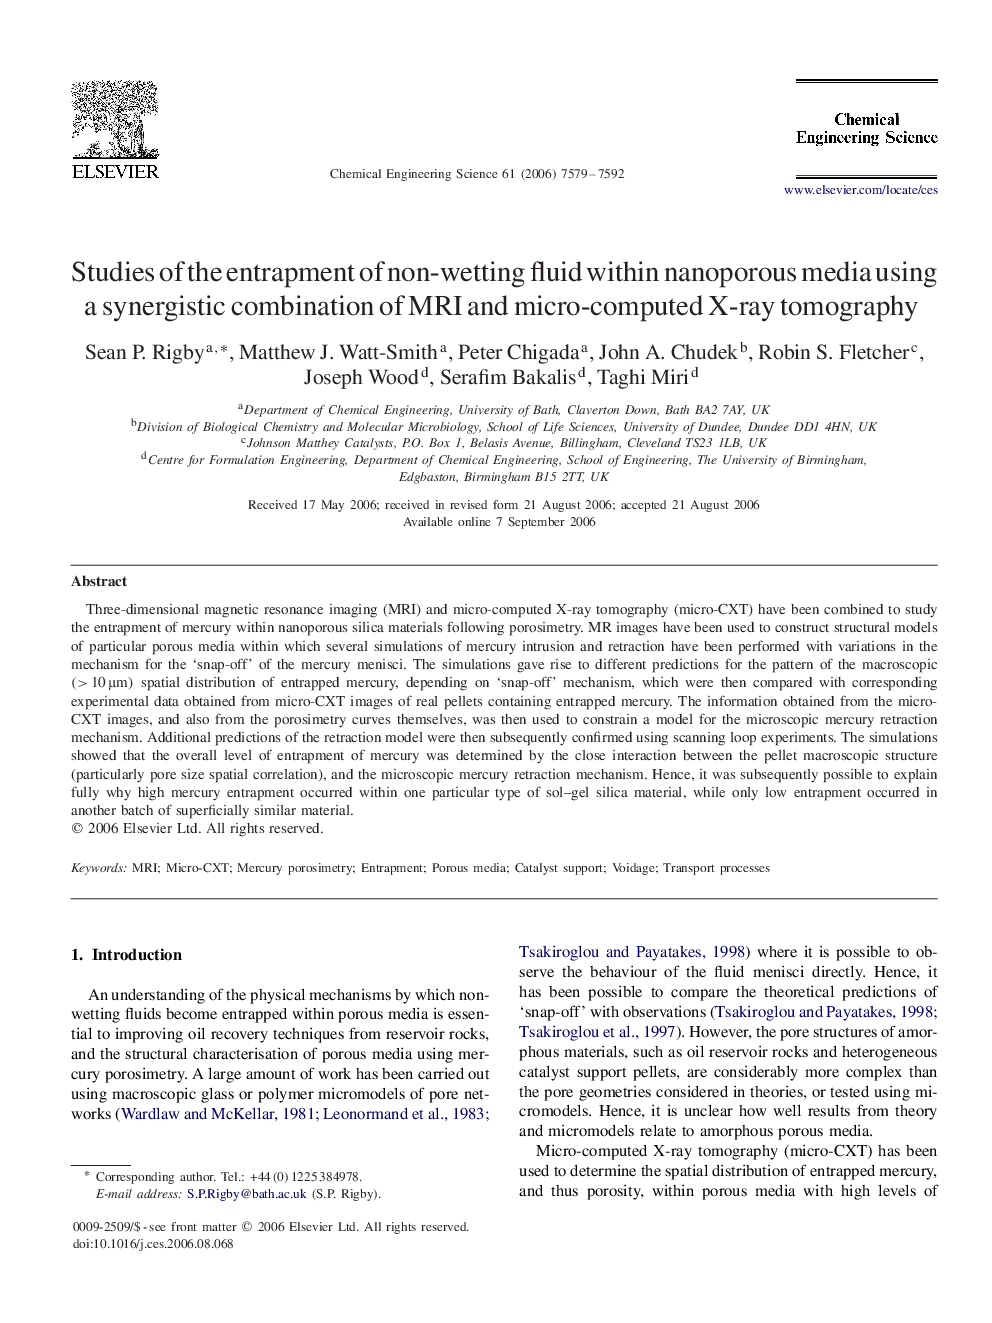 Studies of the entrapment of non-wetting fluid within nanoporous media using a synergistic combination of MRI and micro-computed X-ray tomography